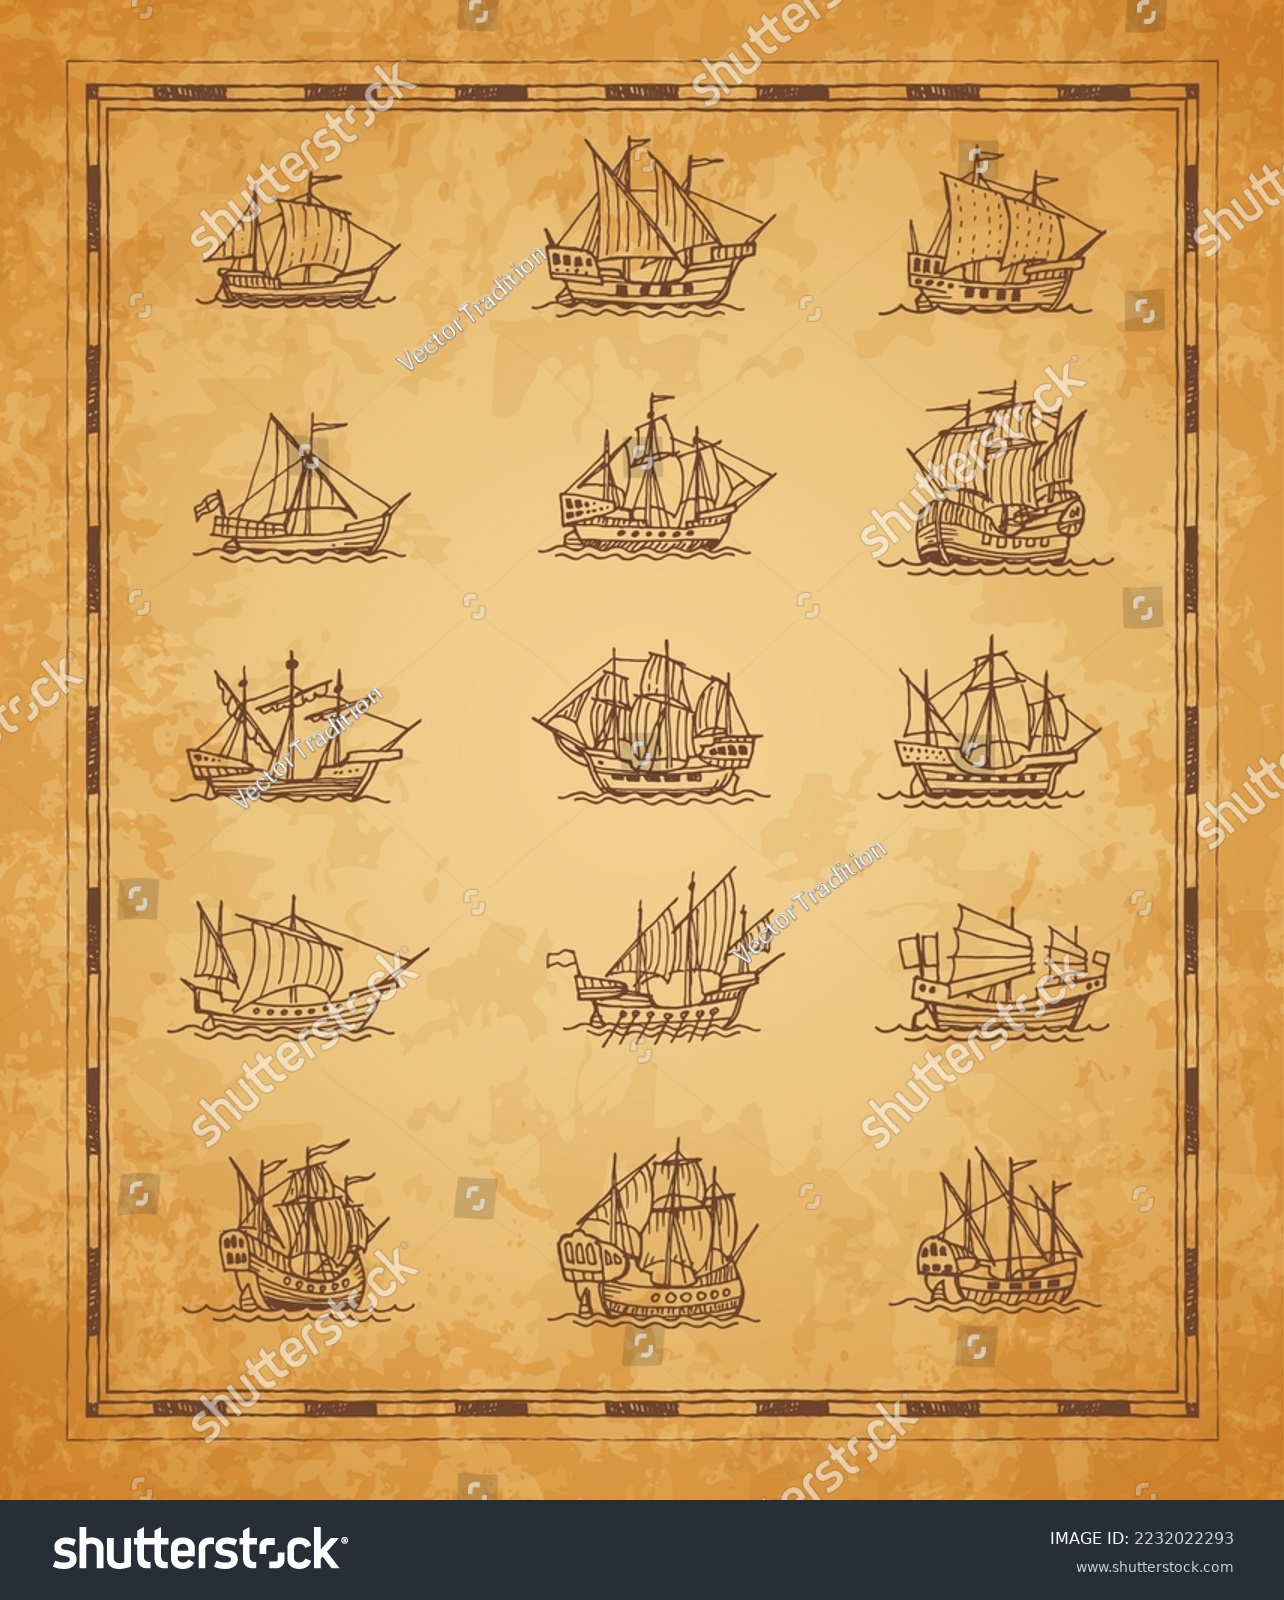 SVG of Vintage sail ships and sailboats. Old vessel sketch, ancient map or ocean geography parchment scroll paper background with hand drawn historic battleships and sailboats, buccaneer engraved frigates svg